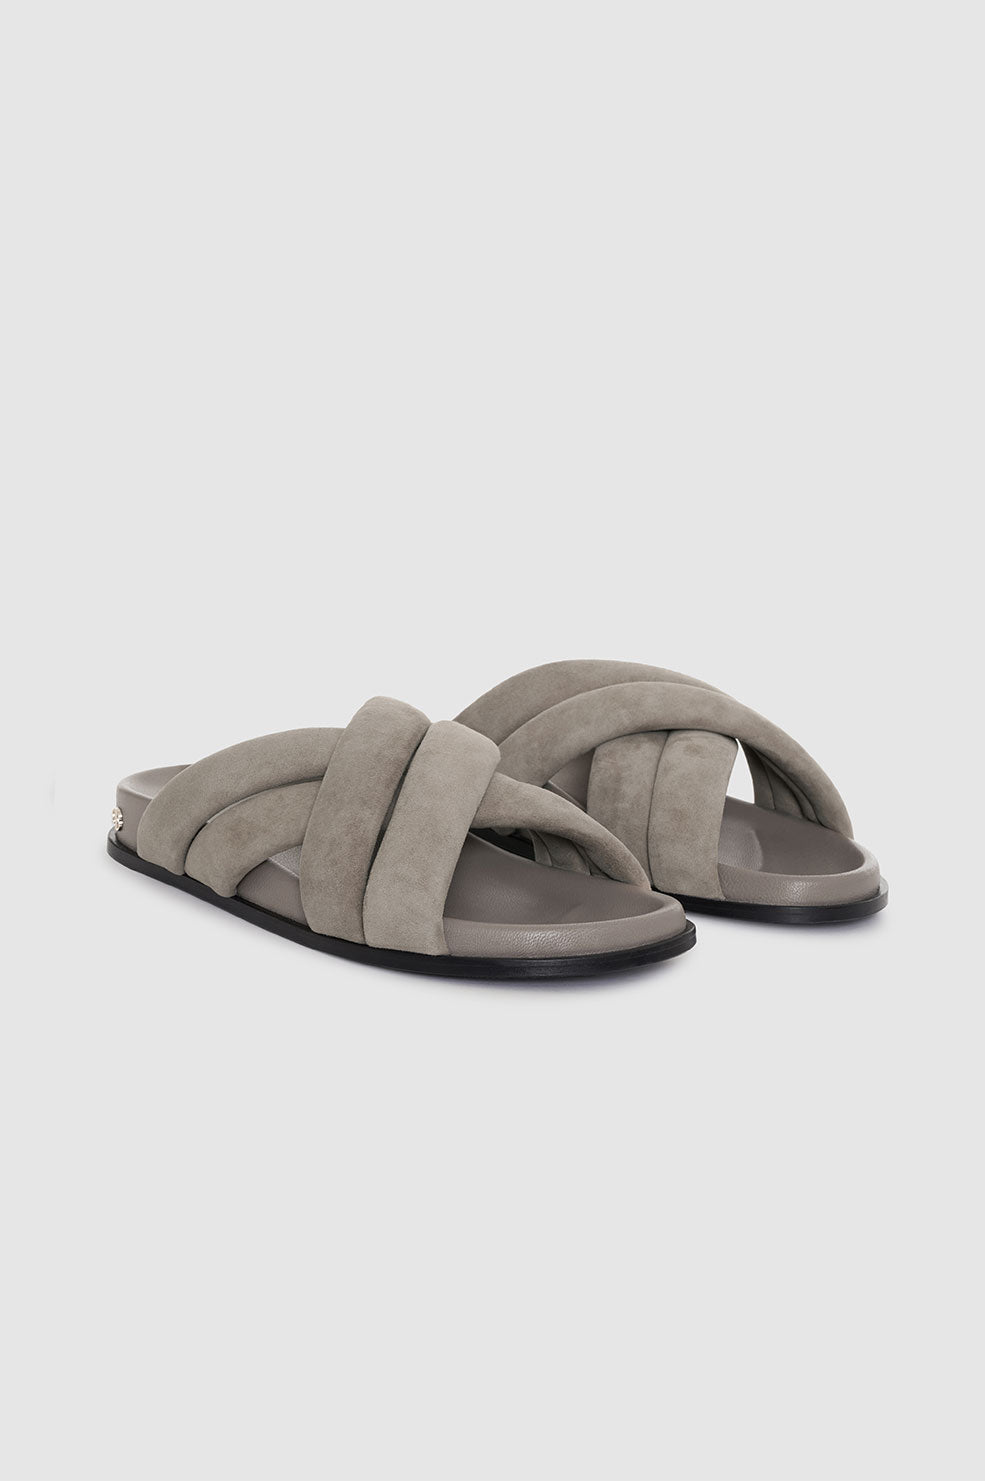 ANINE BING Lizzie Slides - Taupe - Side Pair View